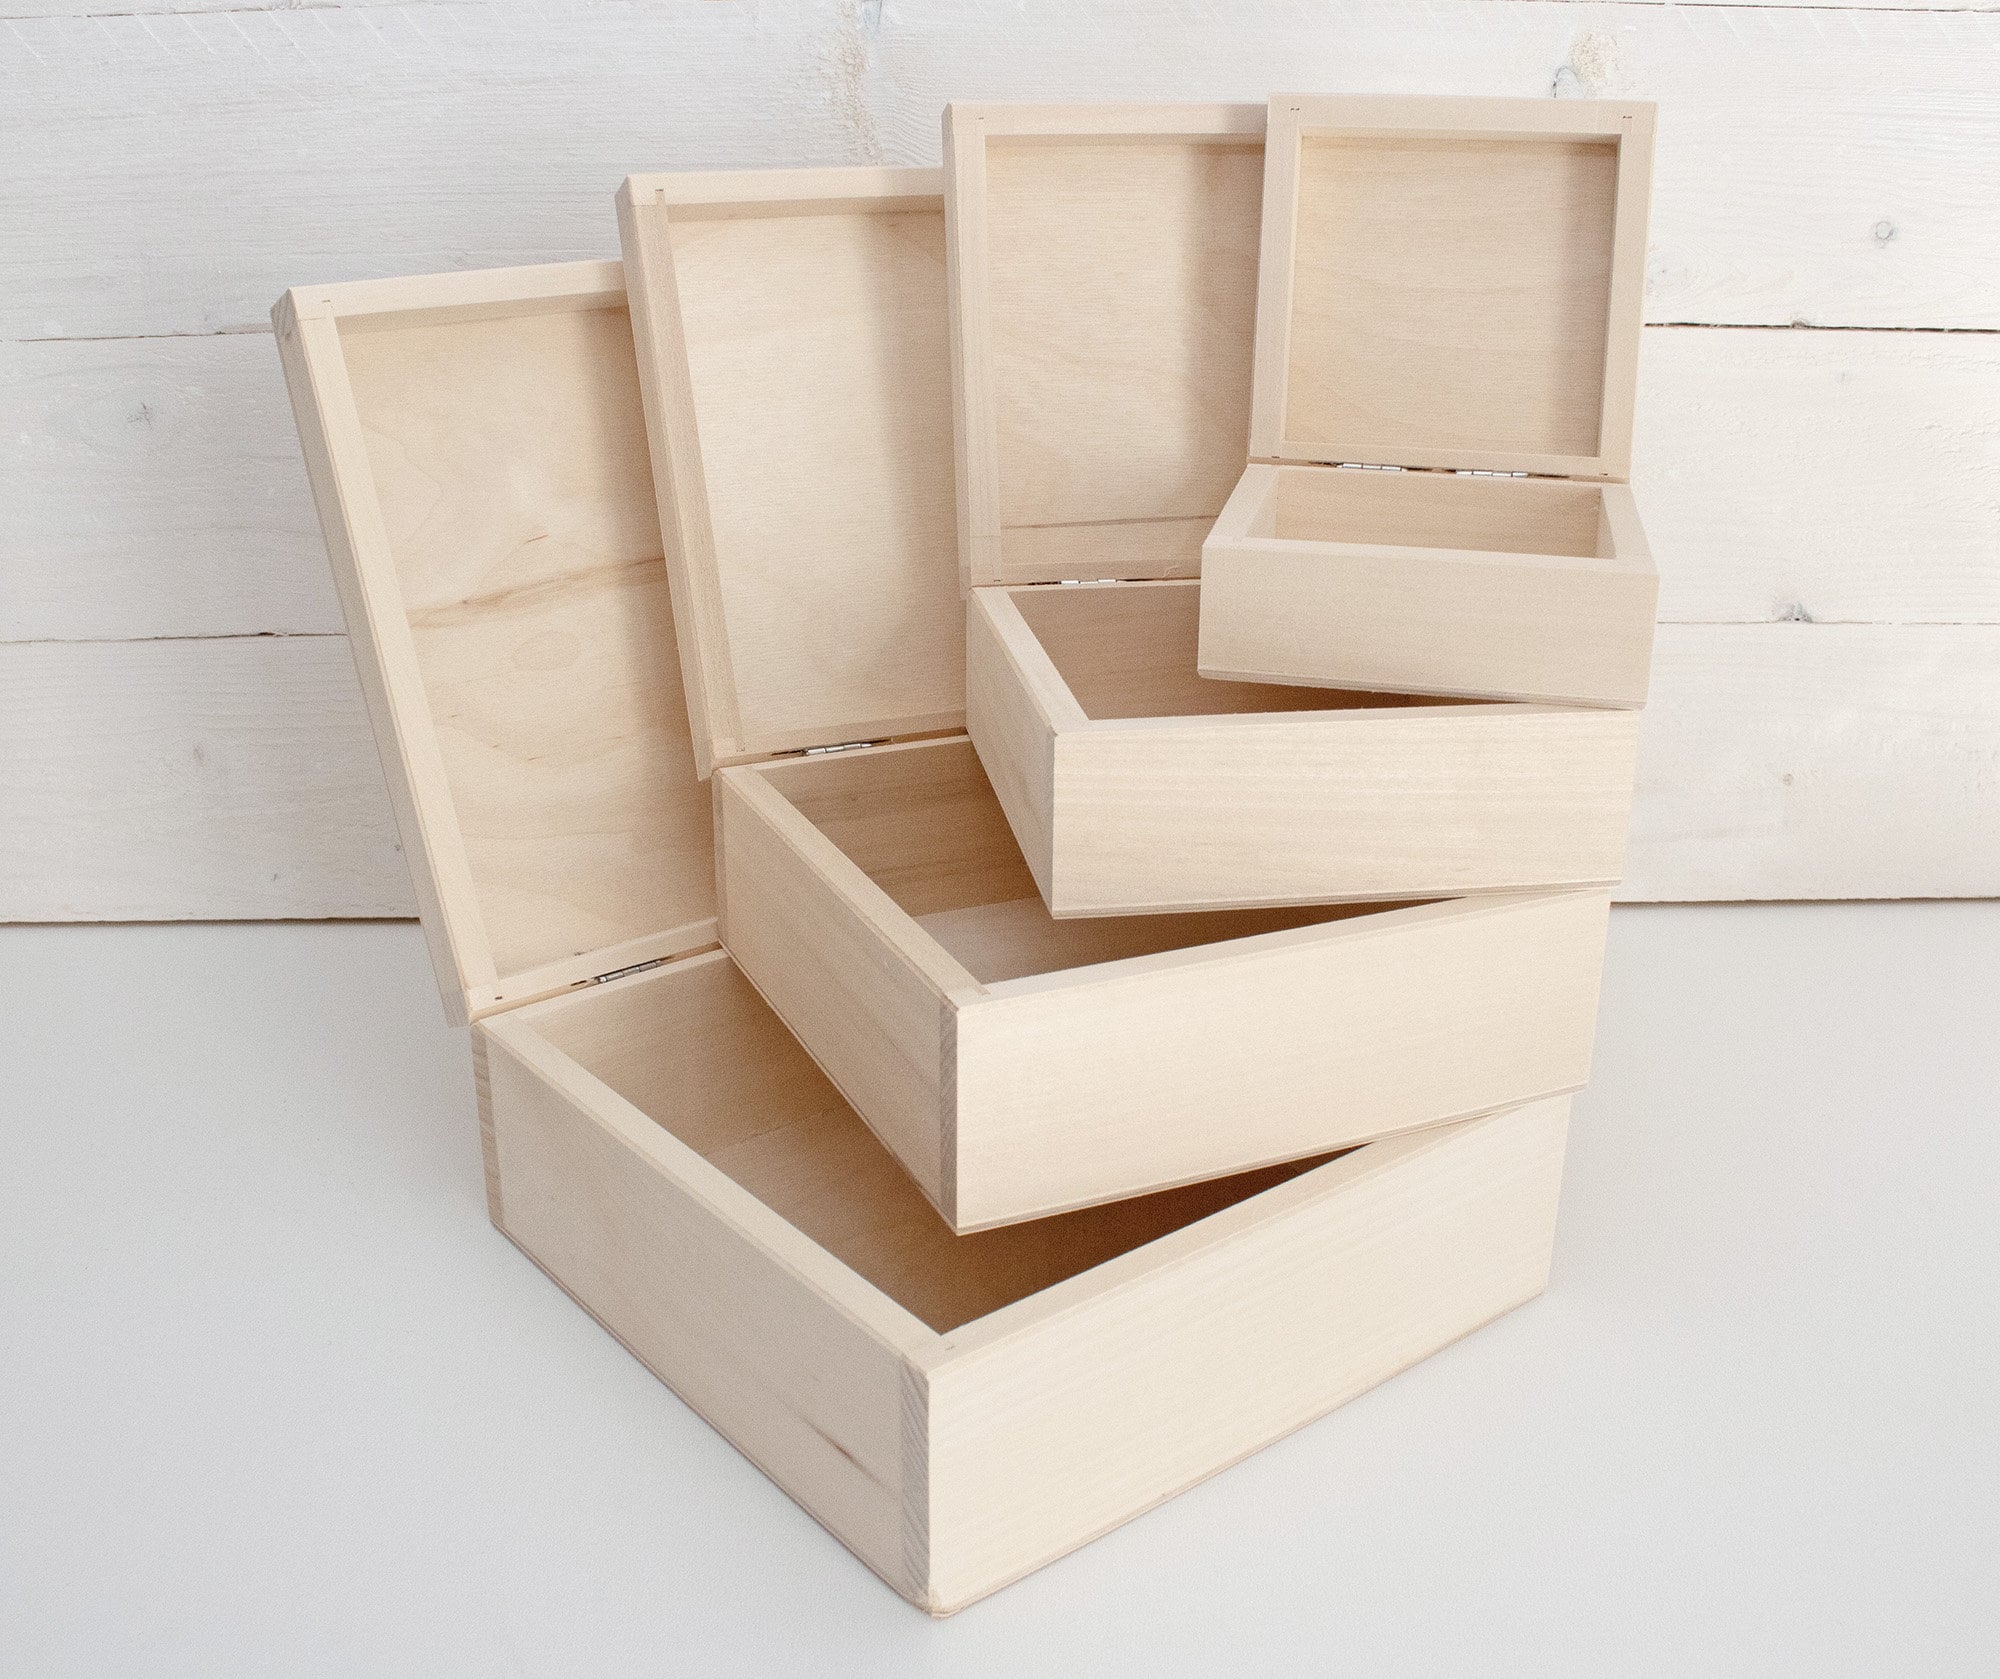 1x Or 3x  Plain Wood Wooden Square Hinged Storage Boxes Craft Gift Box 